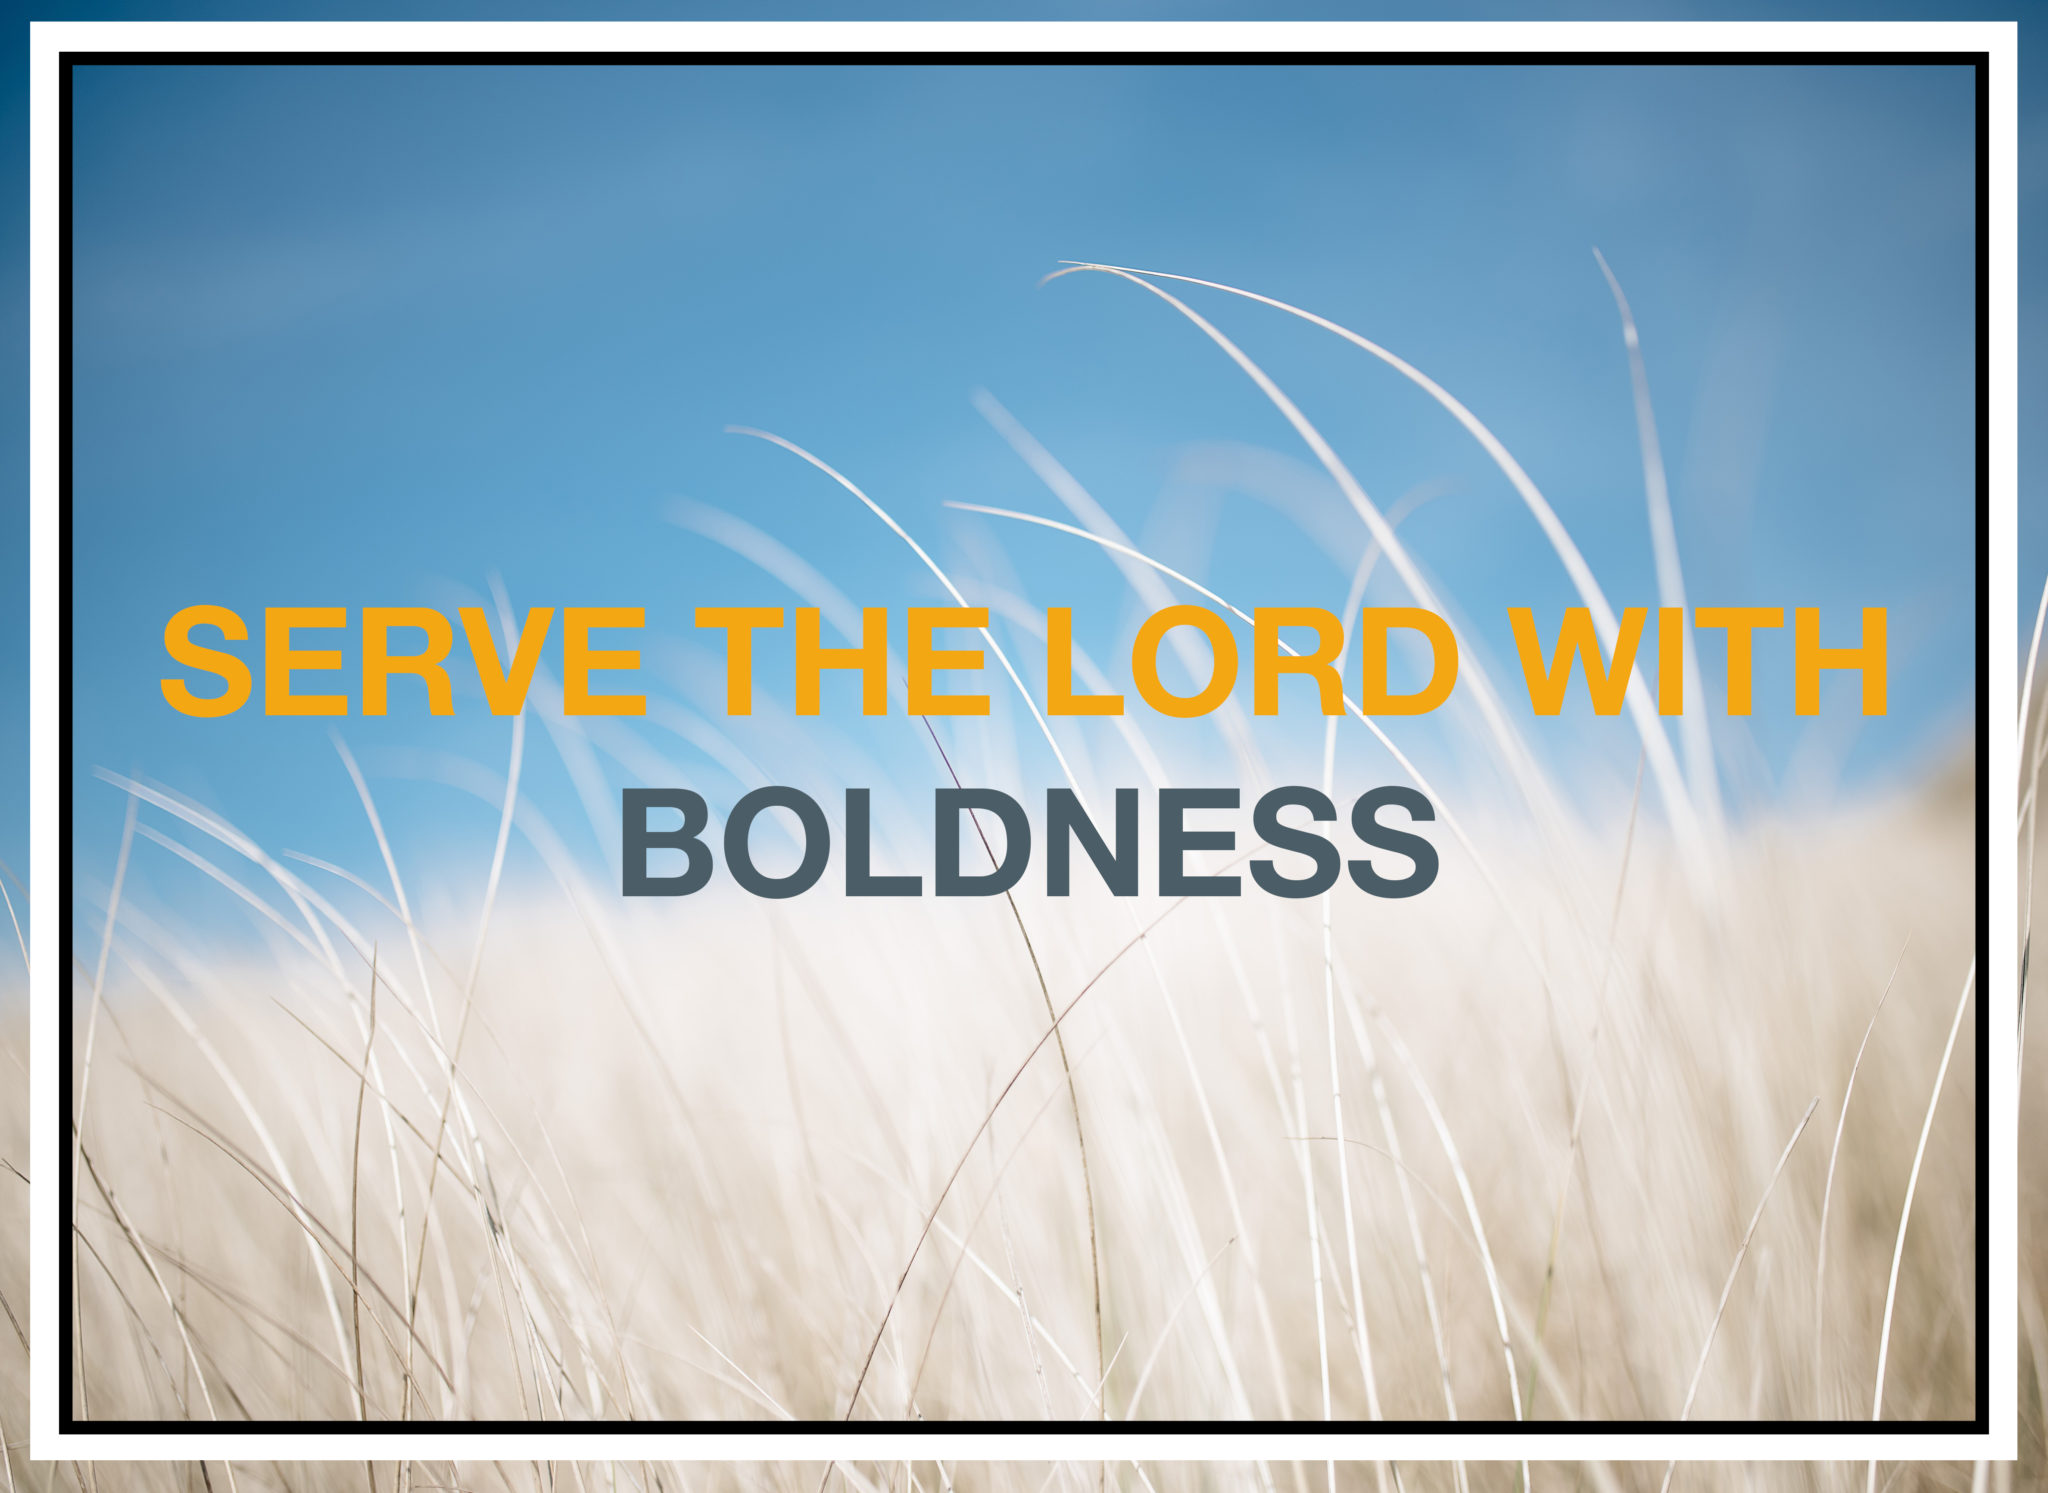 SERVE THE LORD WITH BOLDNESS